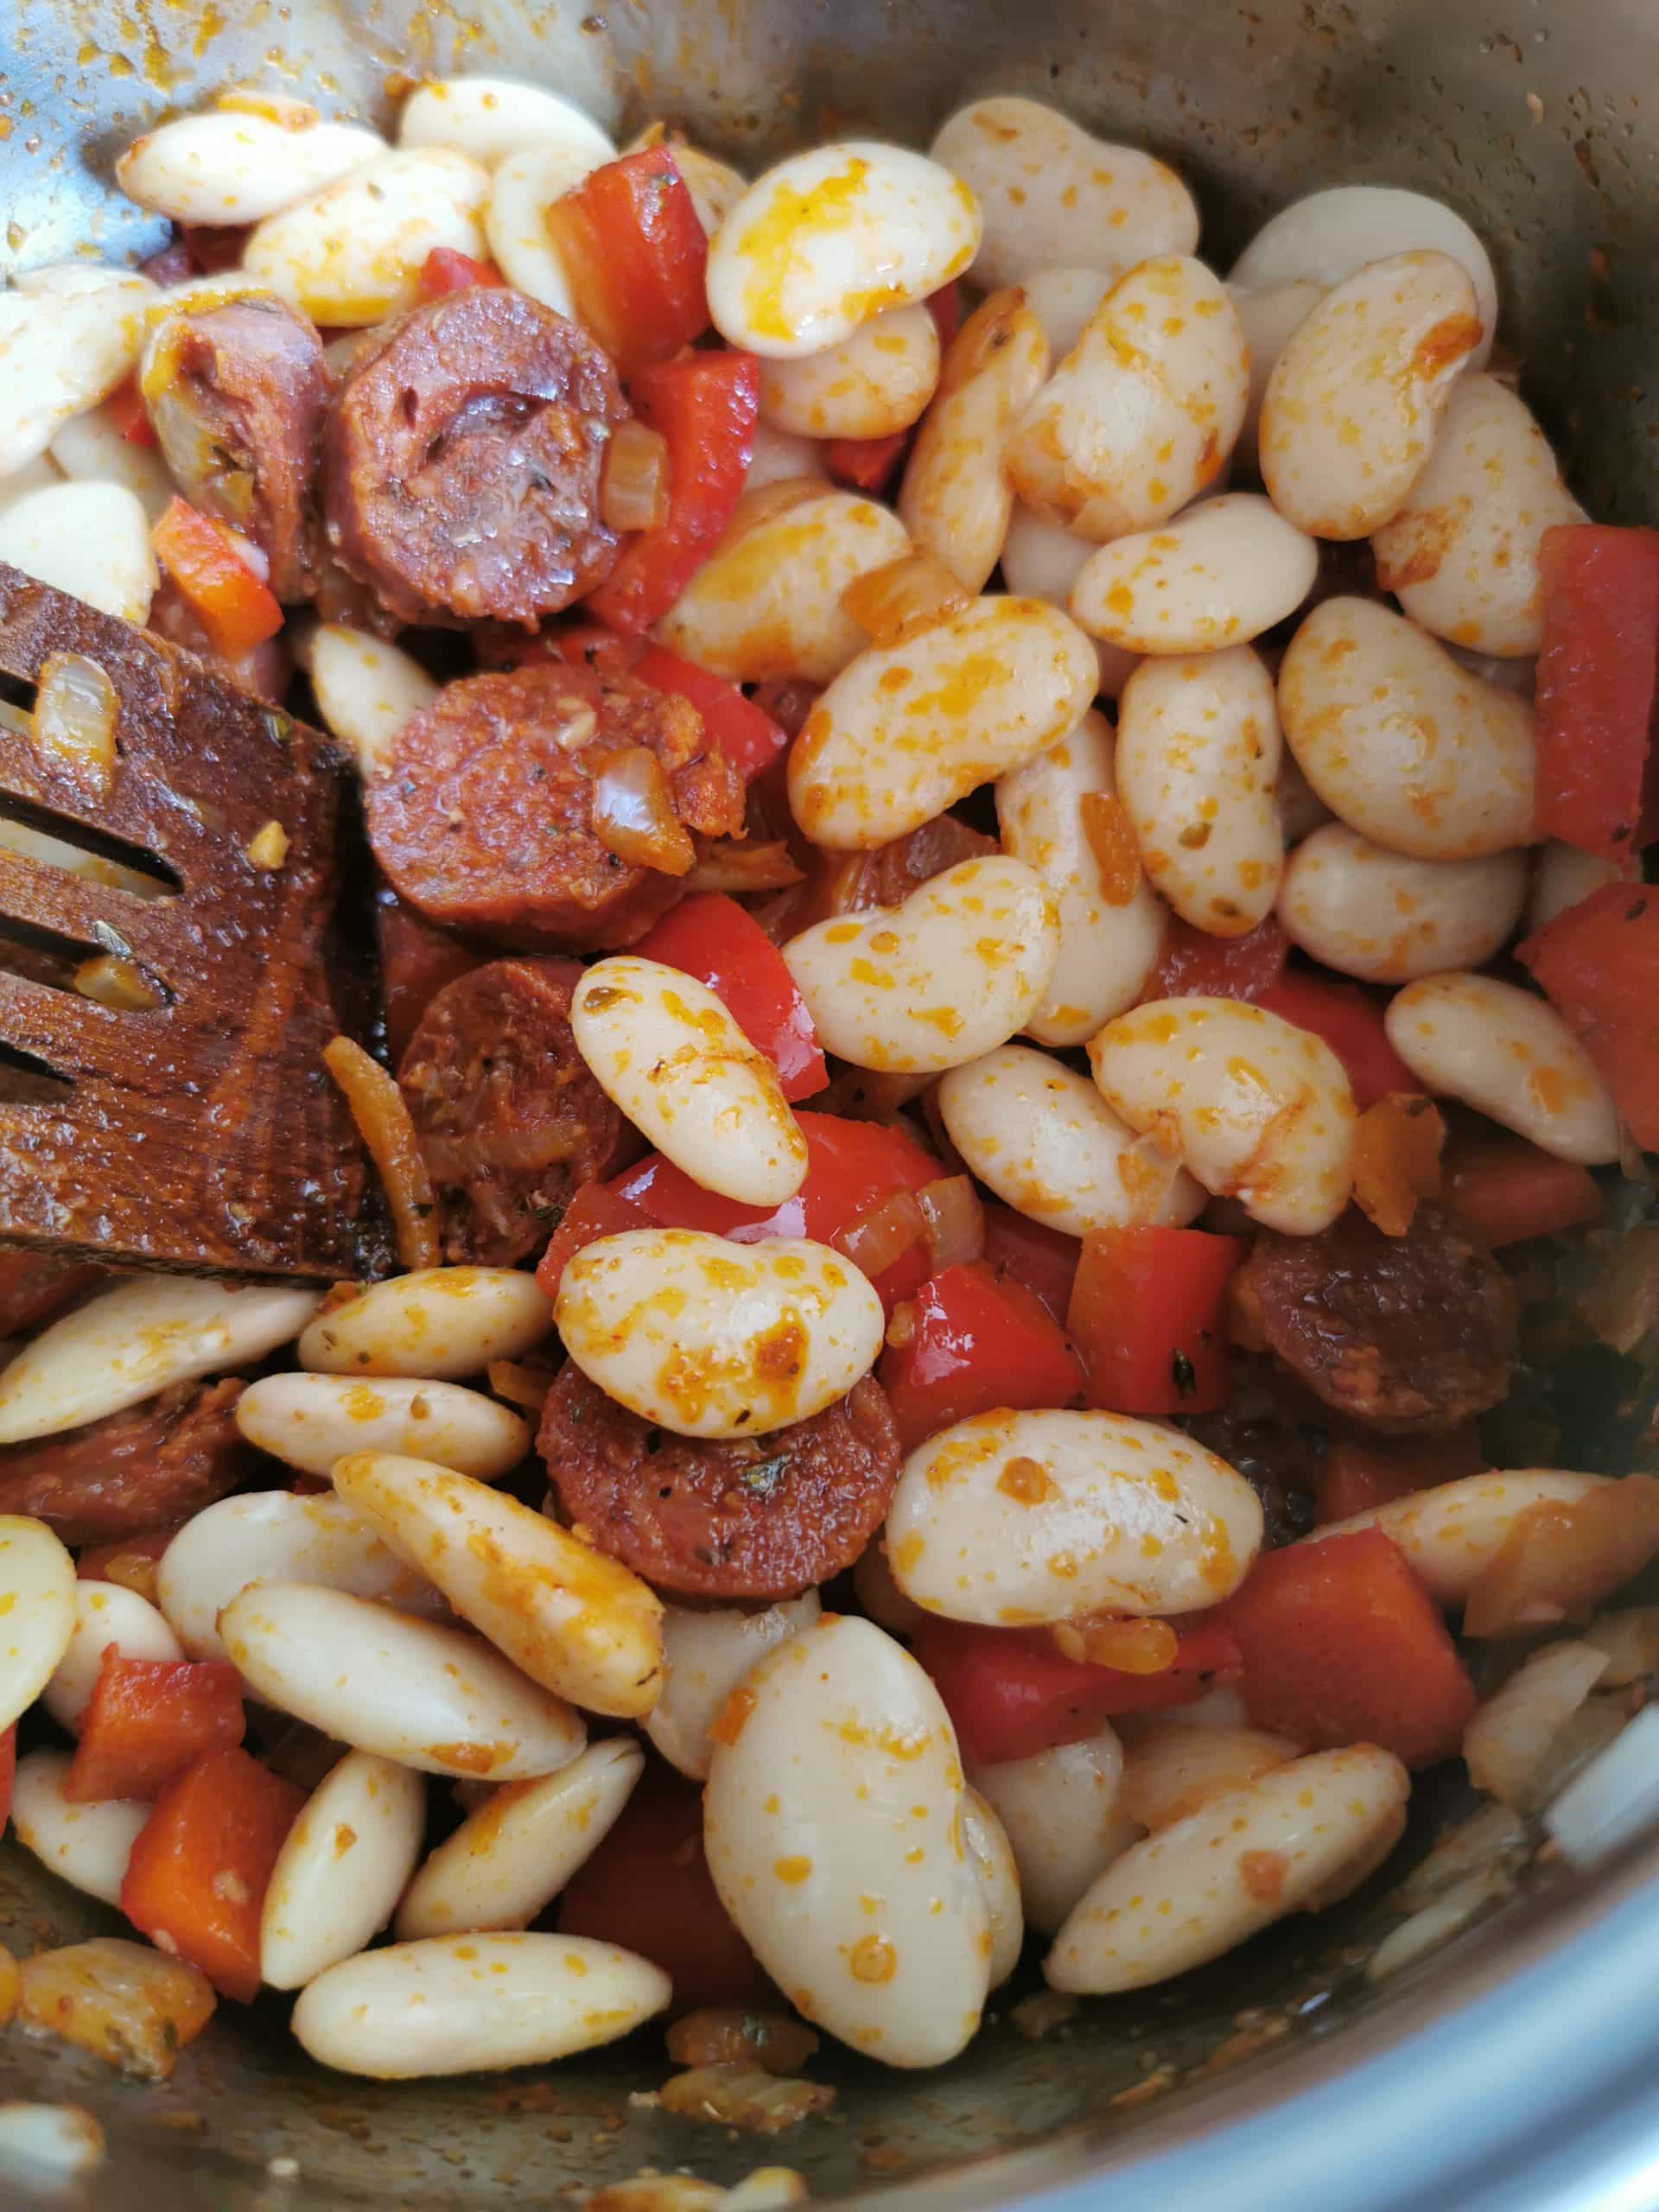 Butter beans, chorizo sausage and peppers cooking in a pan